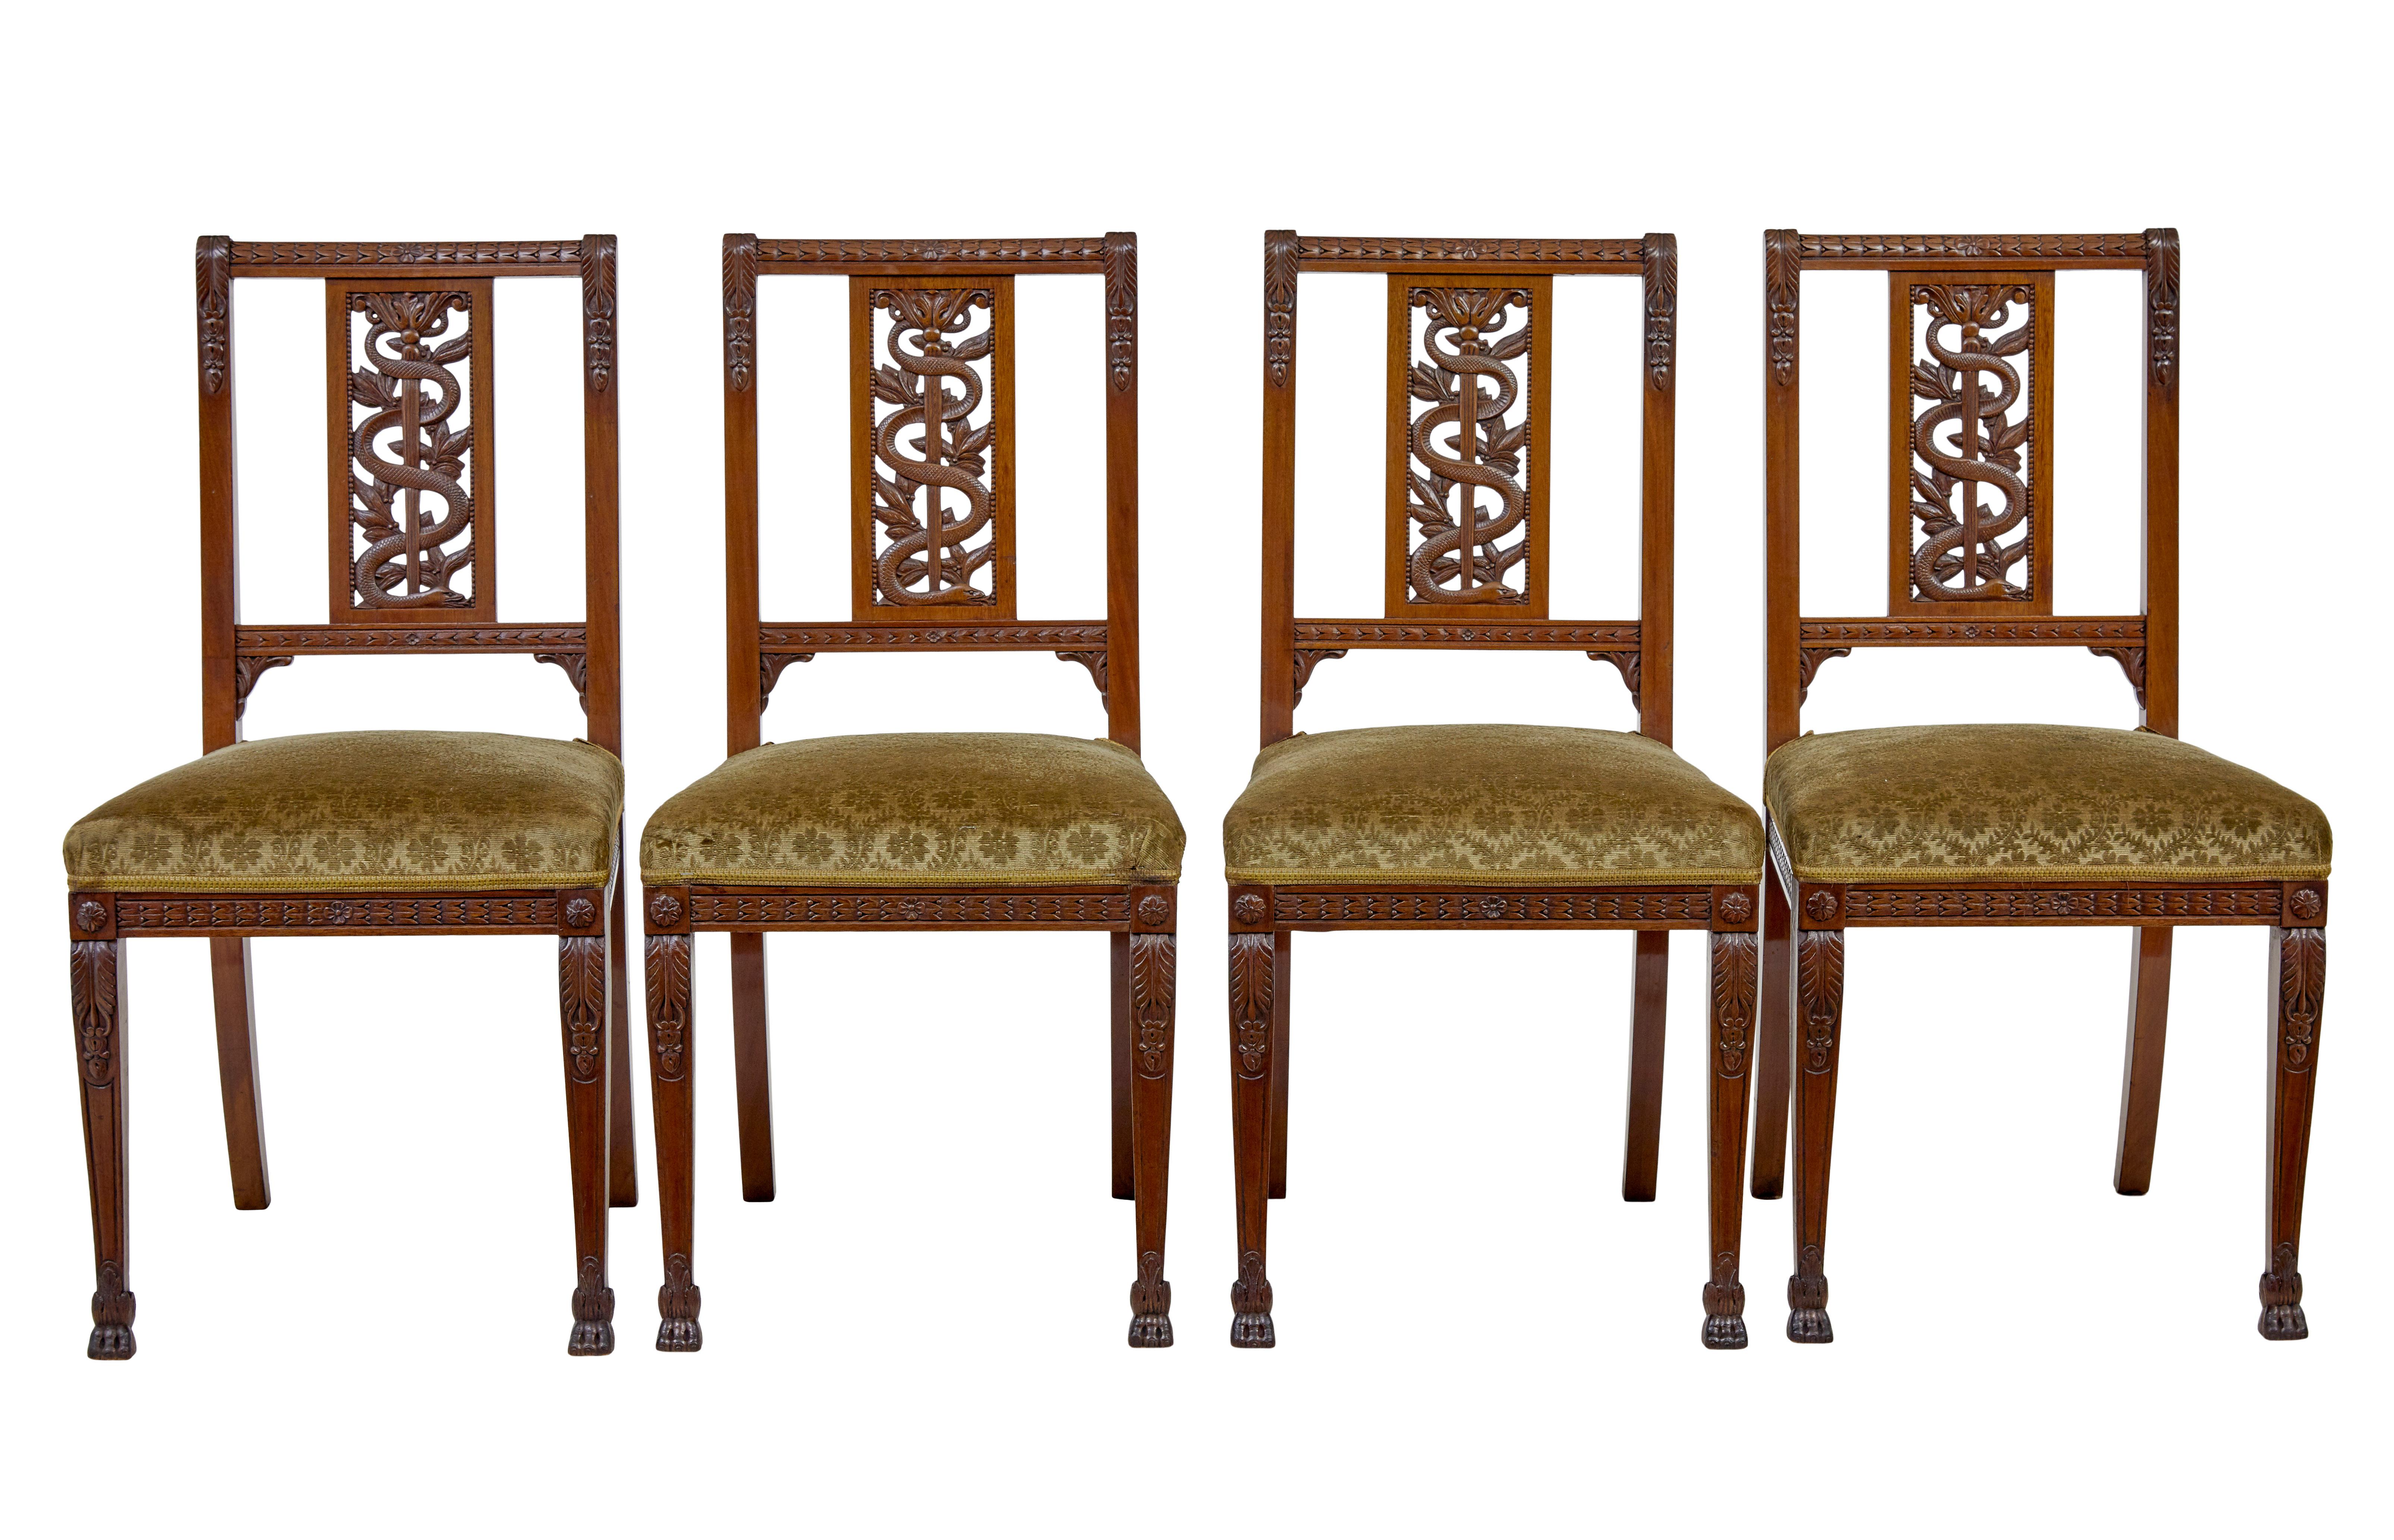 Early 20th century 7 piece carved walnut empire revival suite For Sale 2